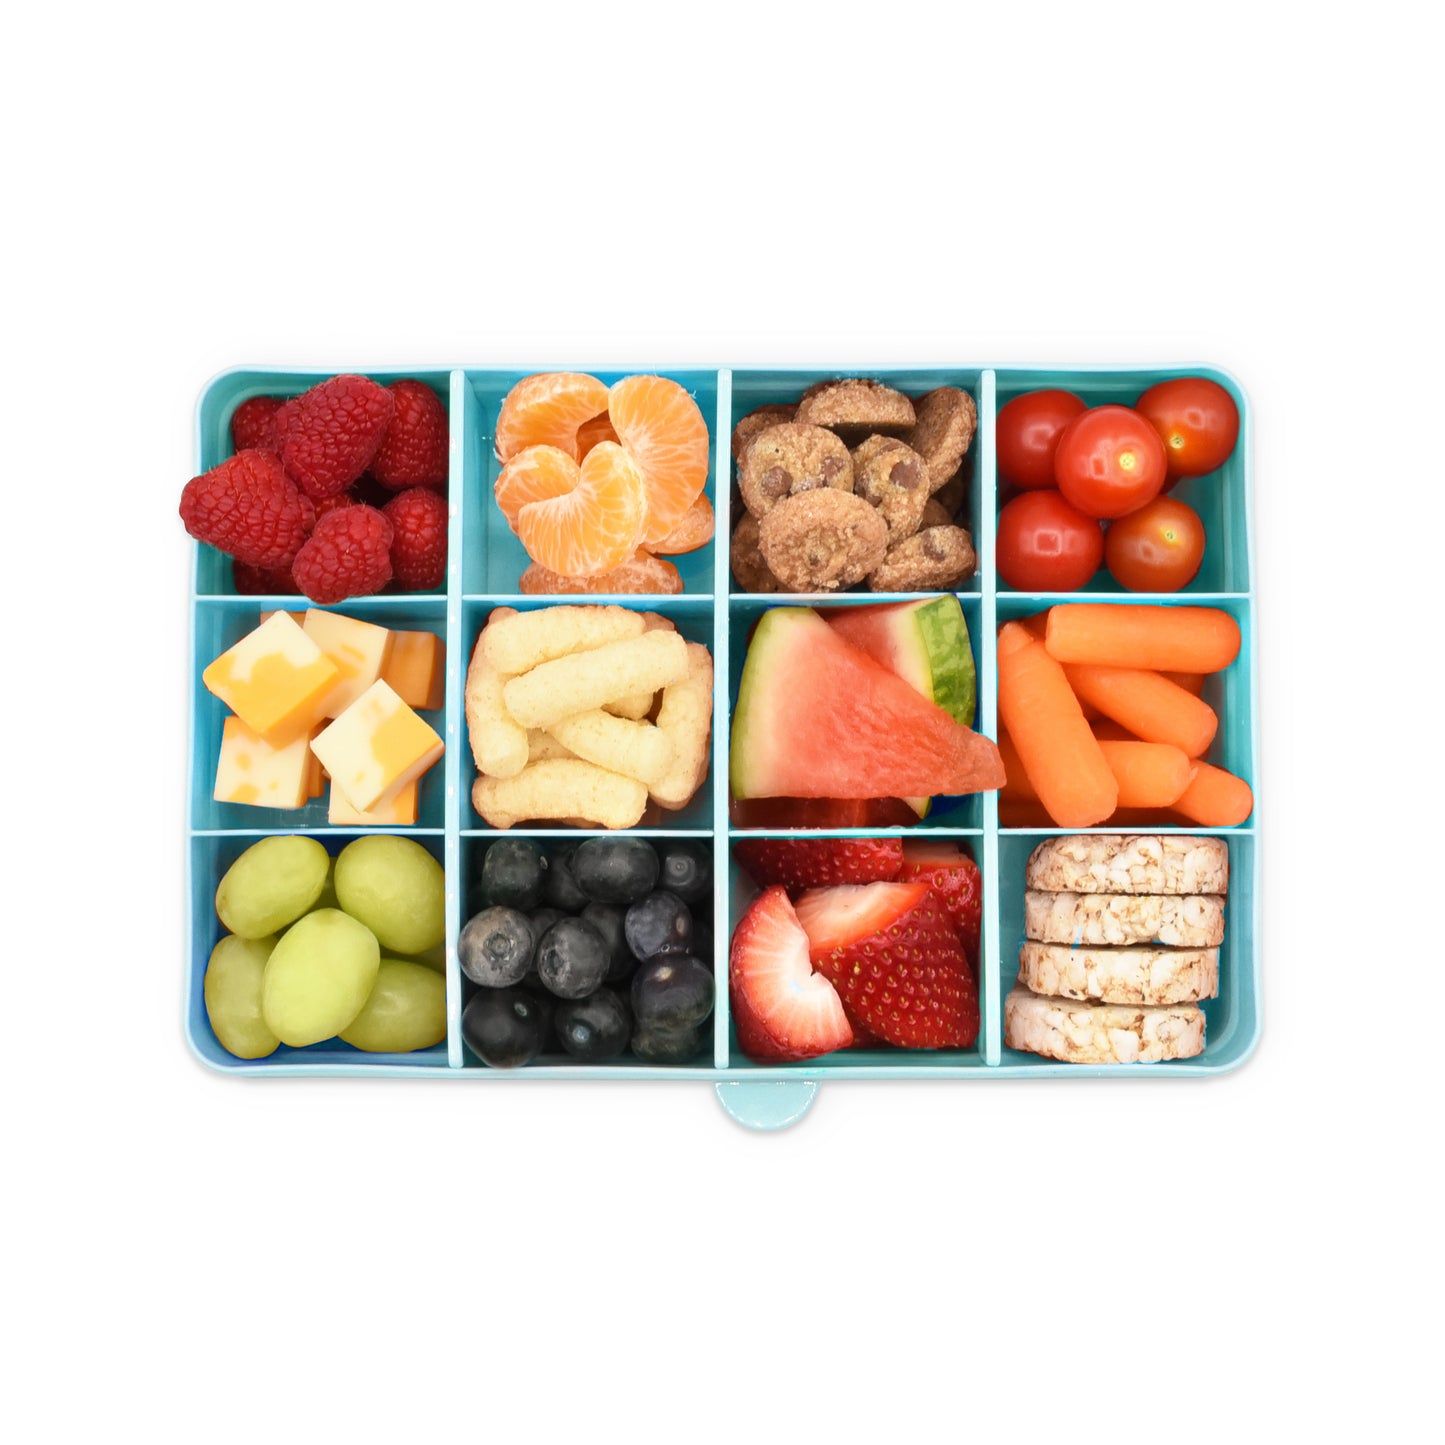 melii Snackle Box Turquoise - 12 Compartment Snack Container with Removable Dividers for Customizable Storage - Ideal for On the Go Snacking, BPA Free, Easy to Open and Clean